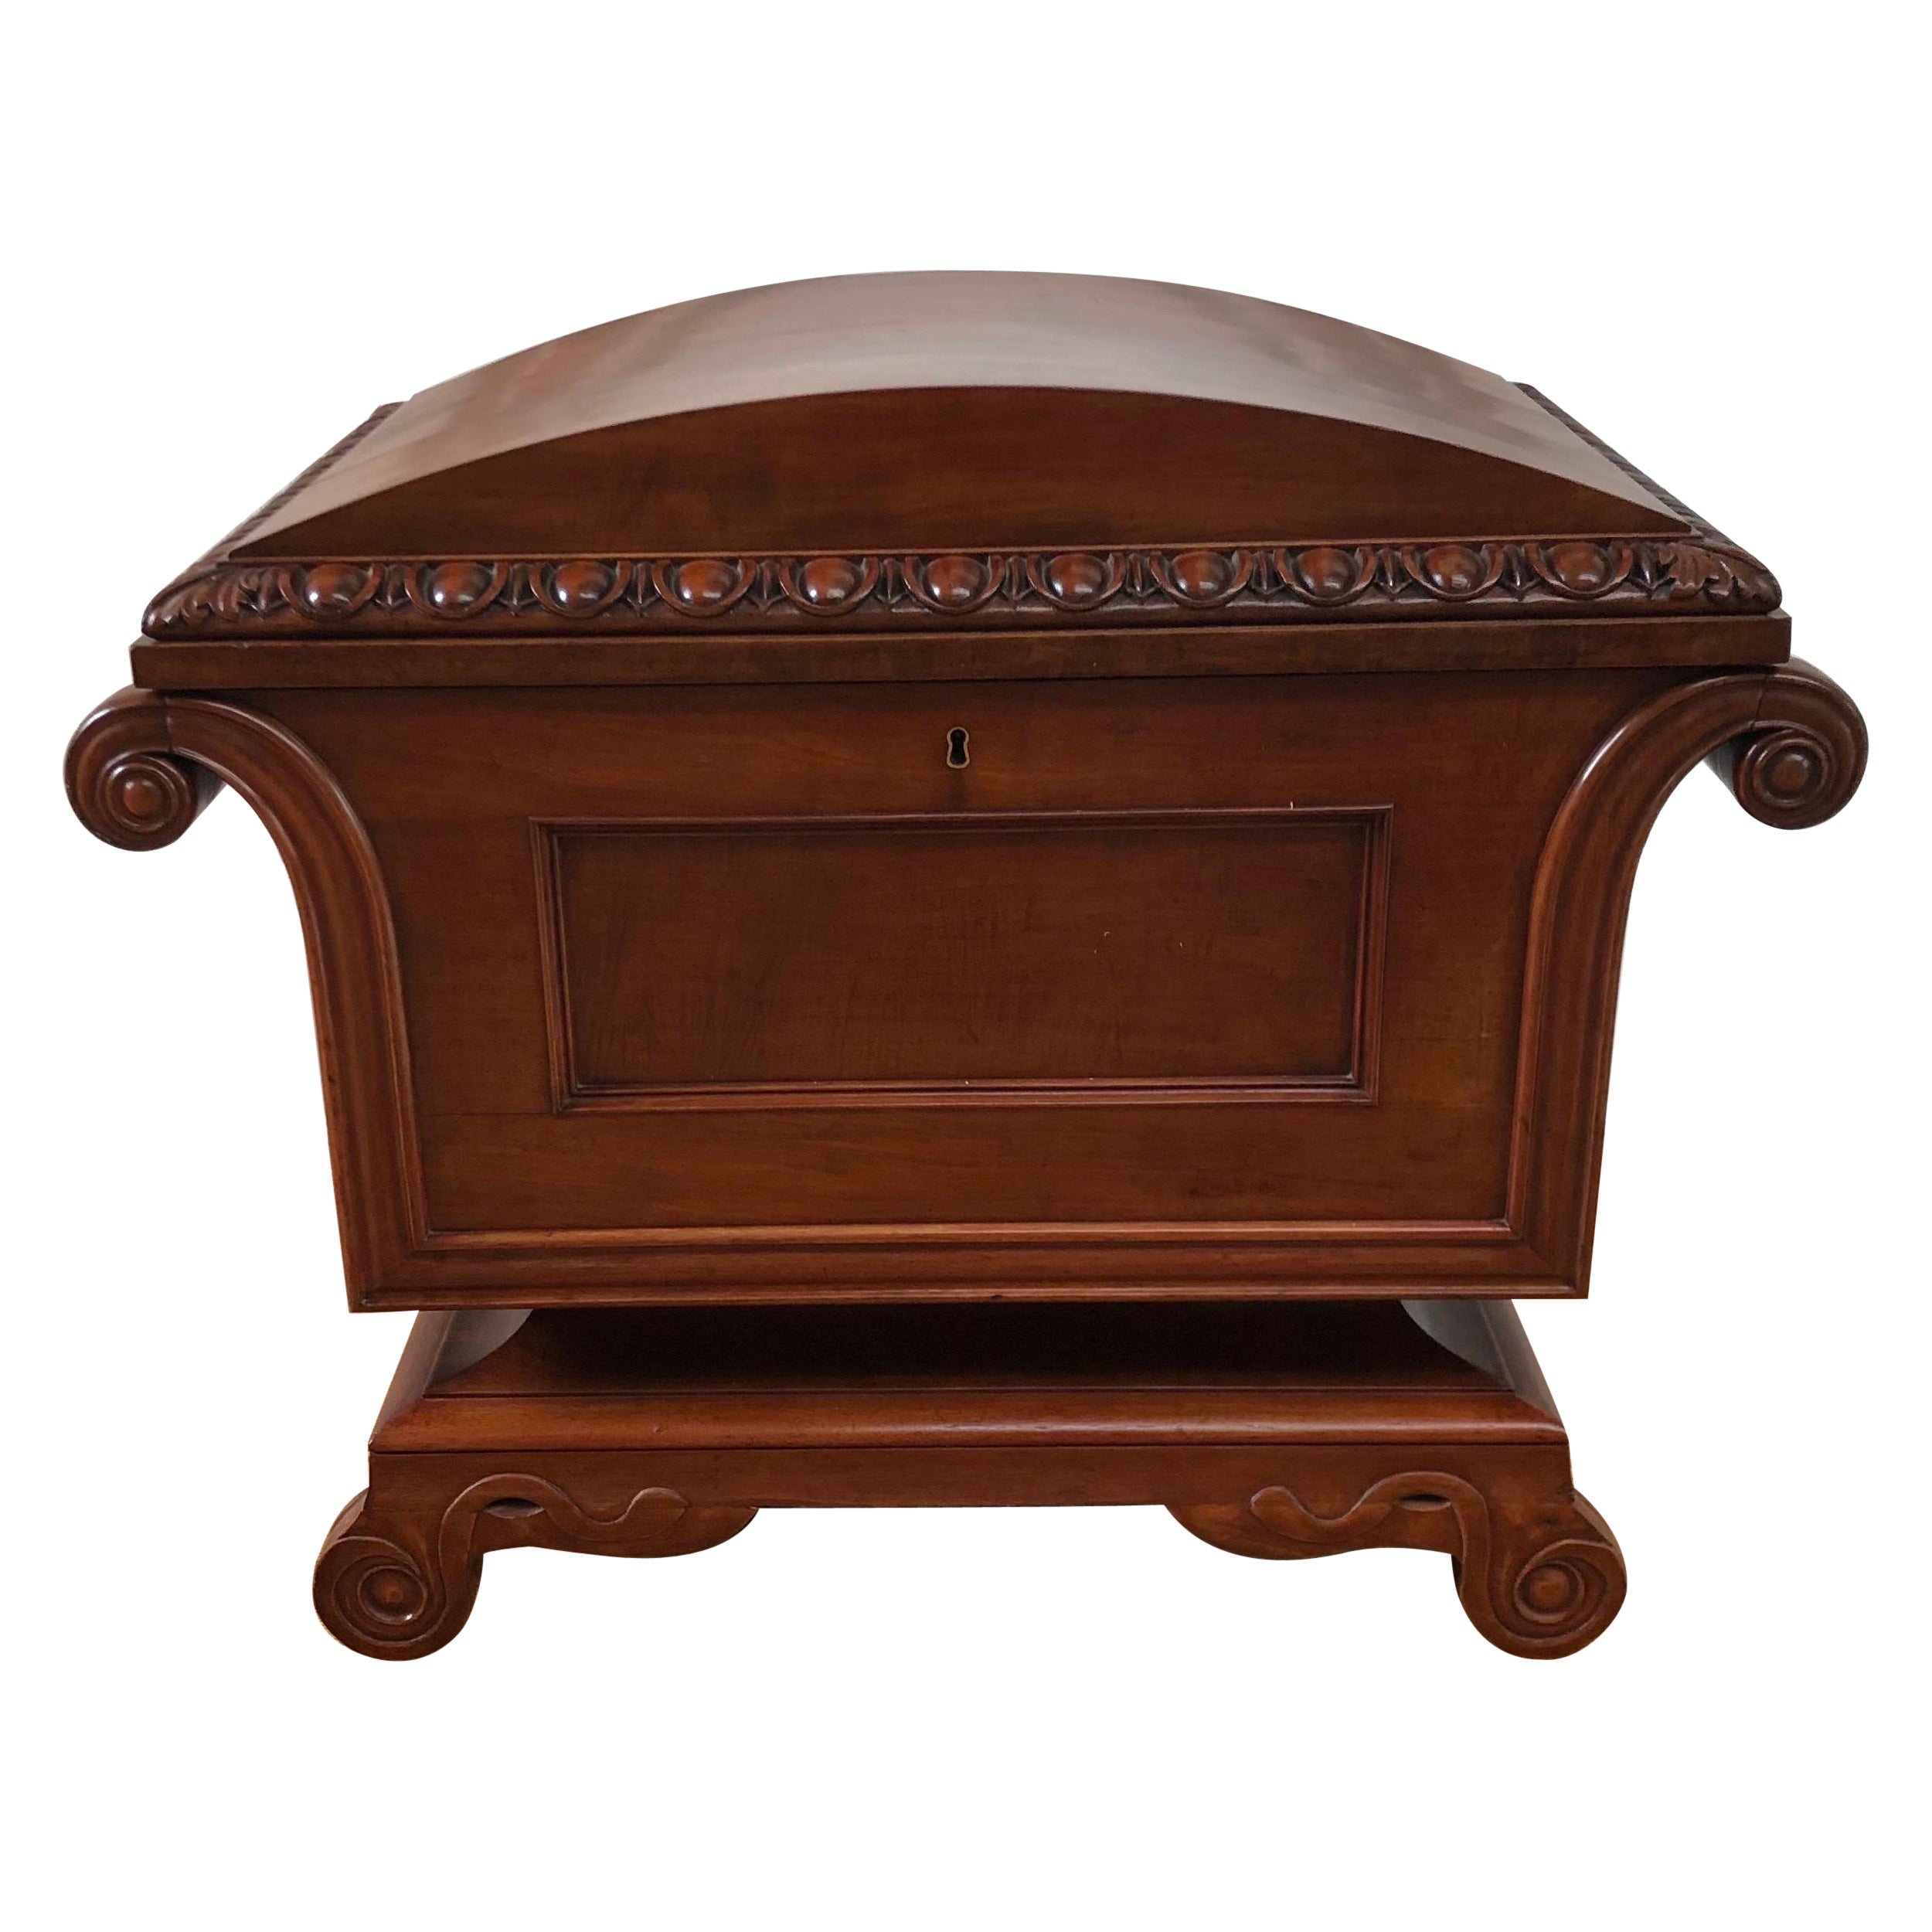 Classical English Regency Sarcophagus Mahogany Dome Top Cellarette / Office File For Sale